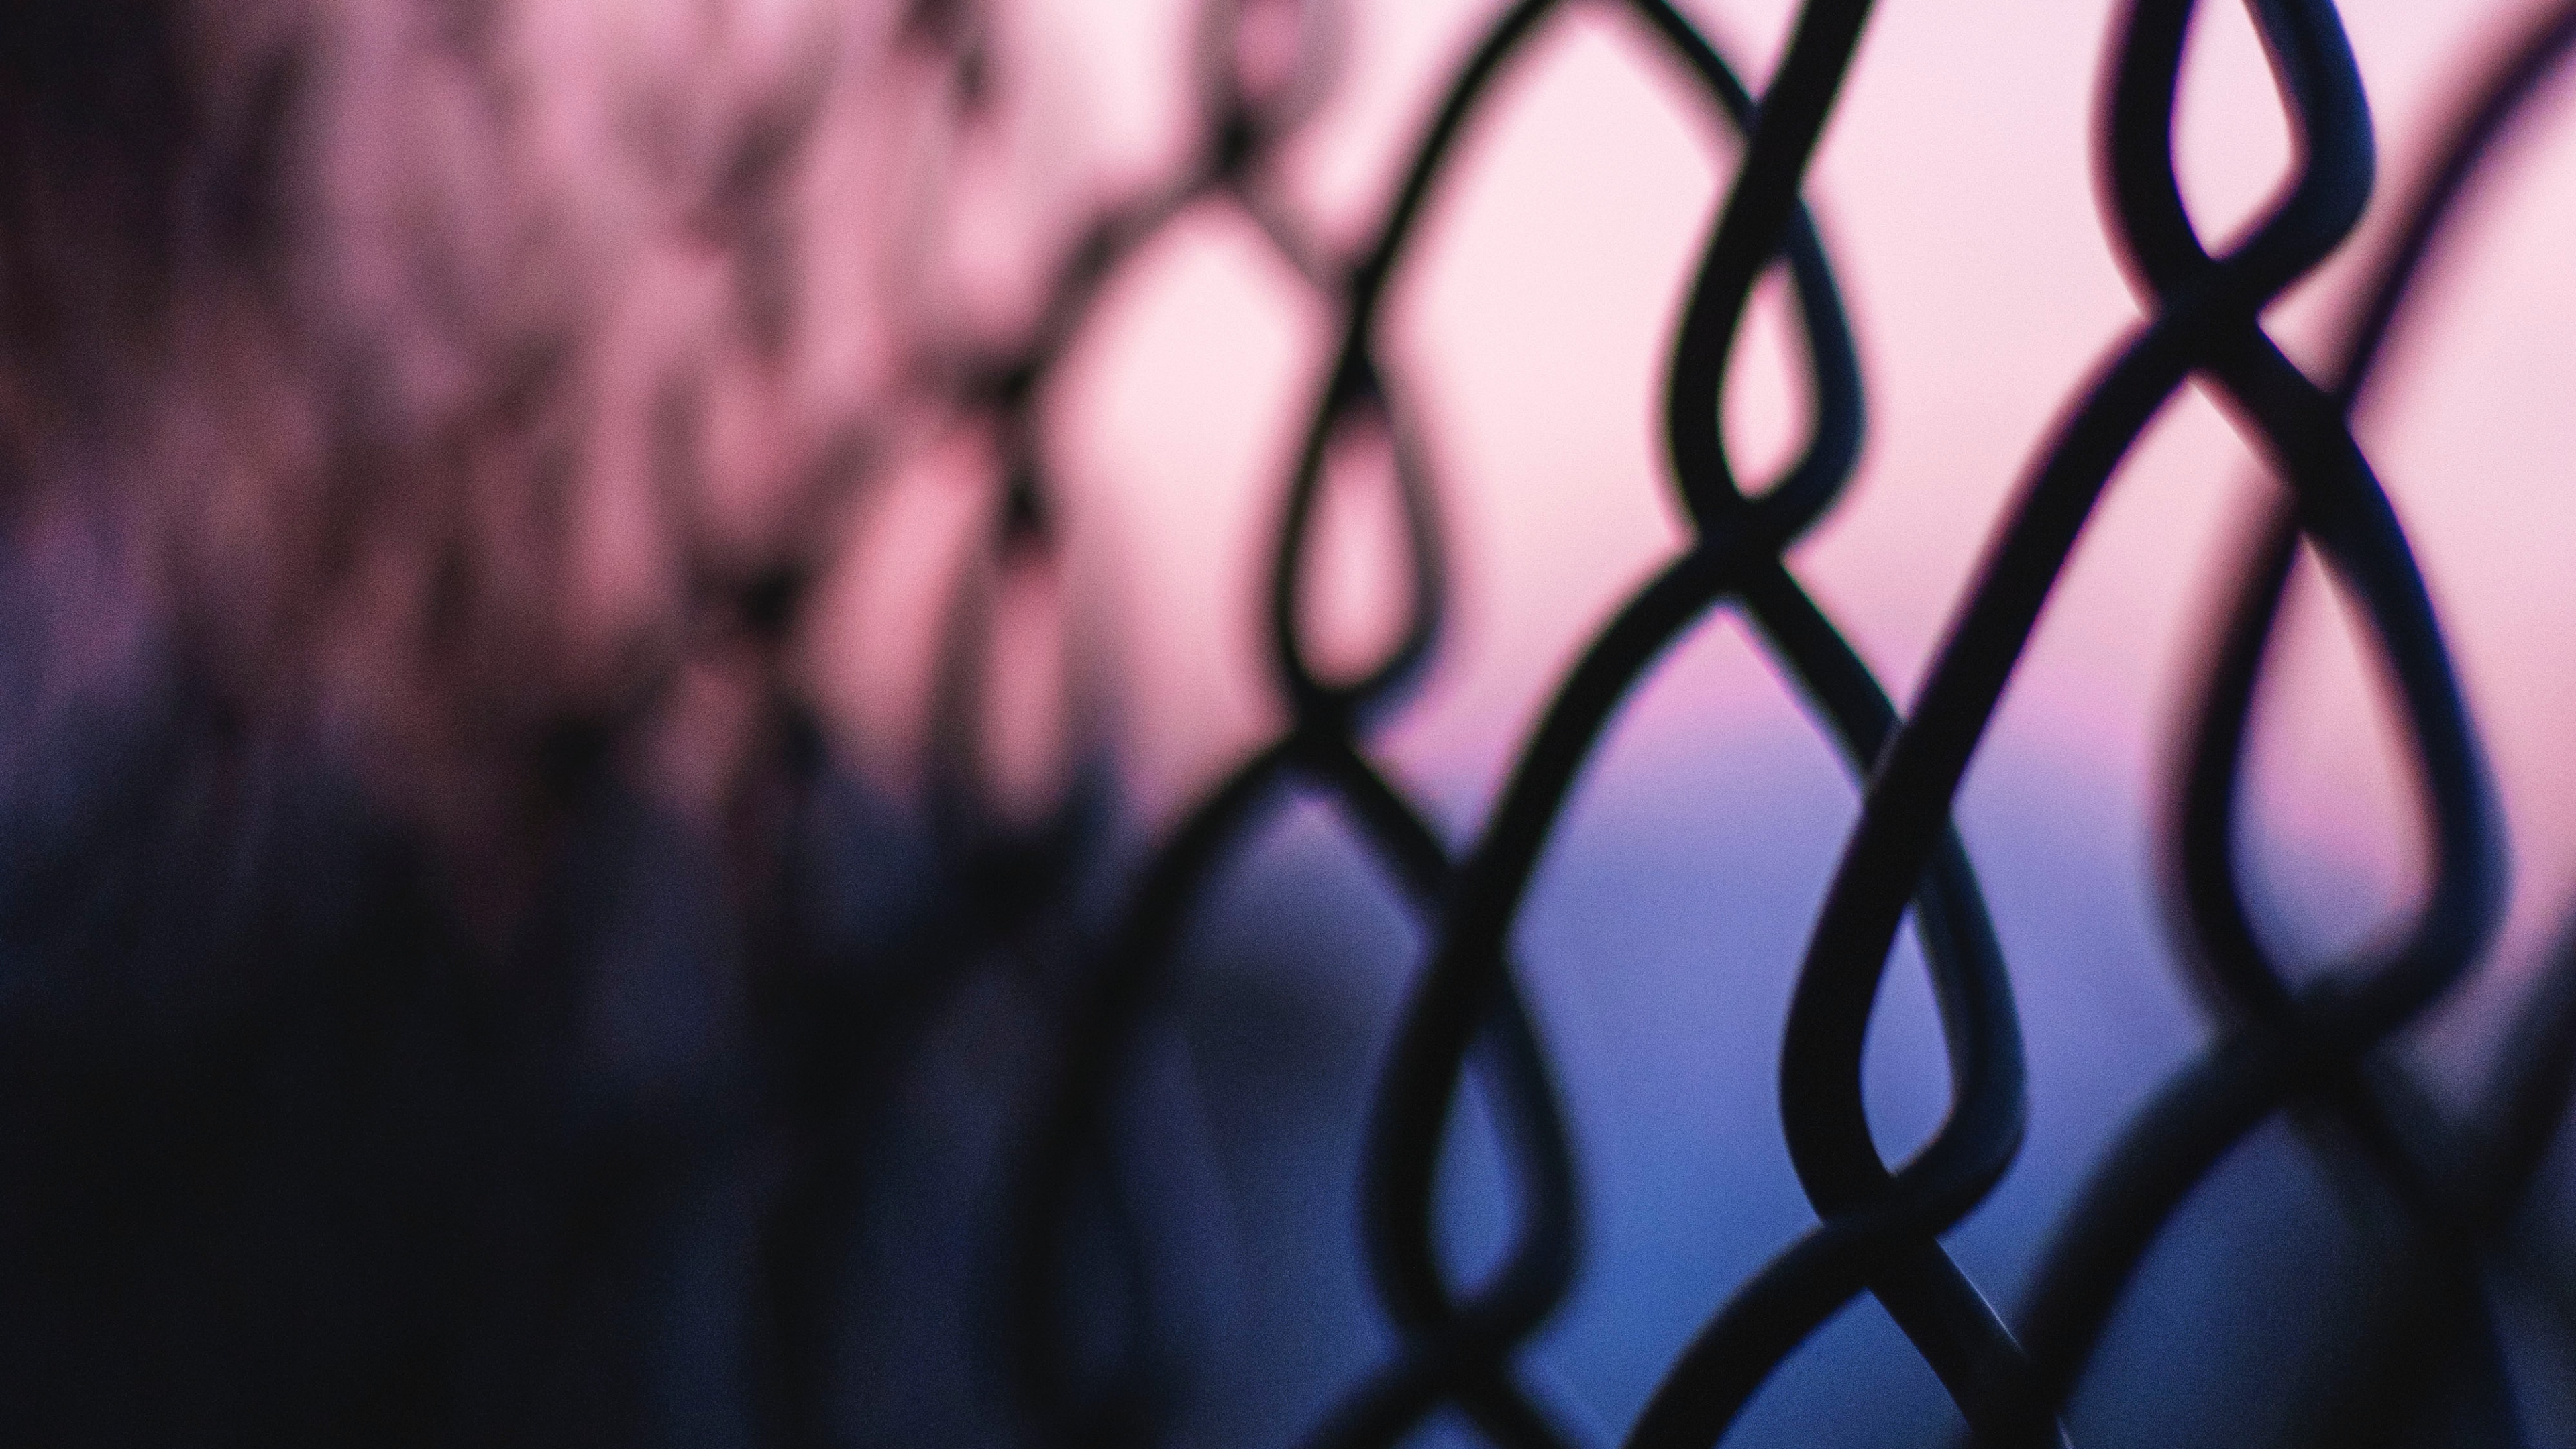 Grey Metal Fence During Daytime. Wallpaper in 3840x2160 Resolution